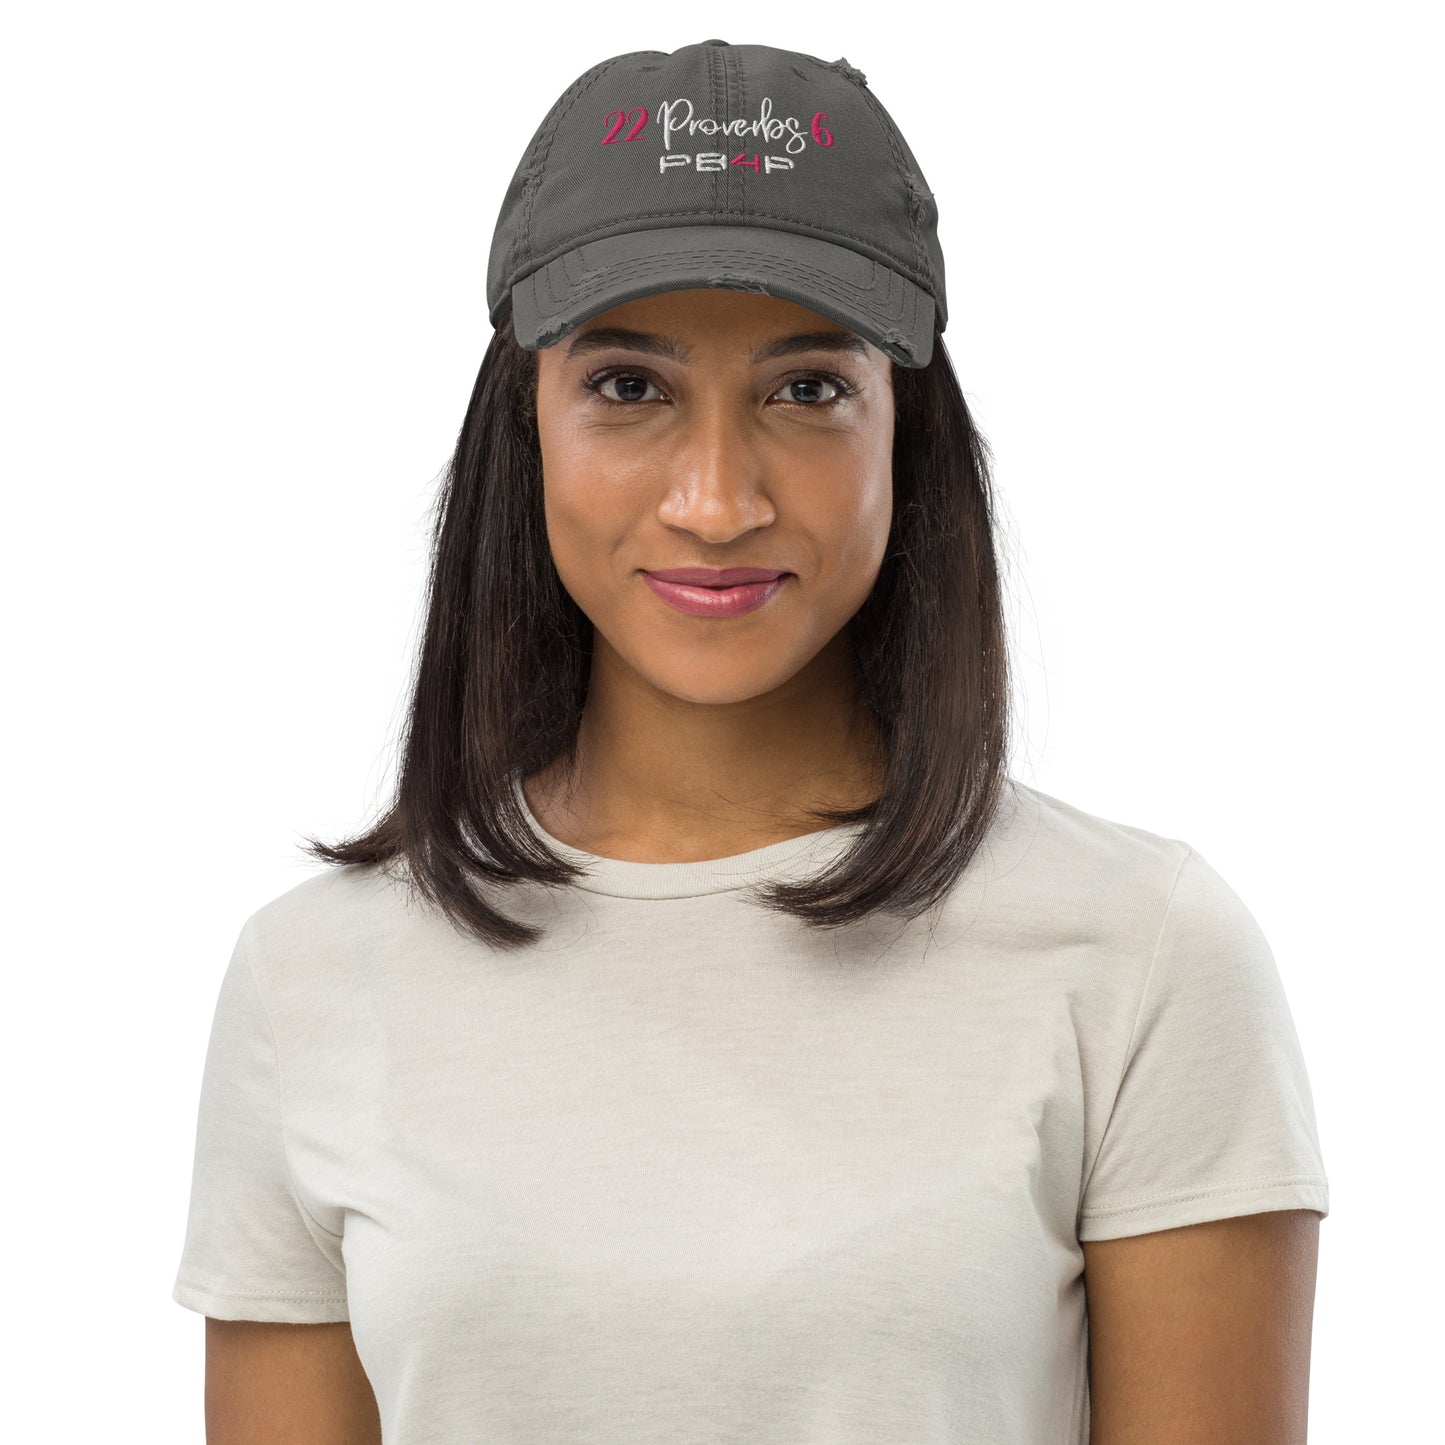 Proverbs 22:6 Distressed Ball Cap - One Size Adjustable